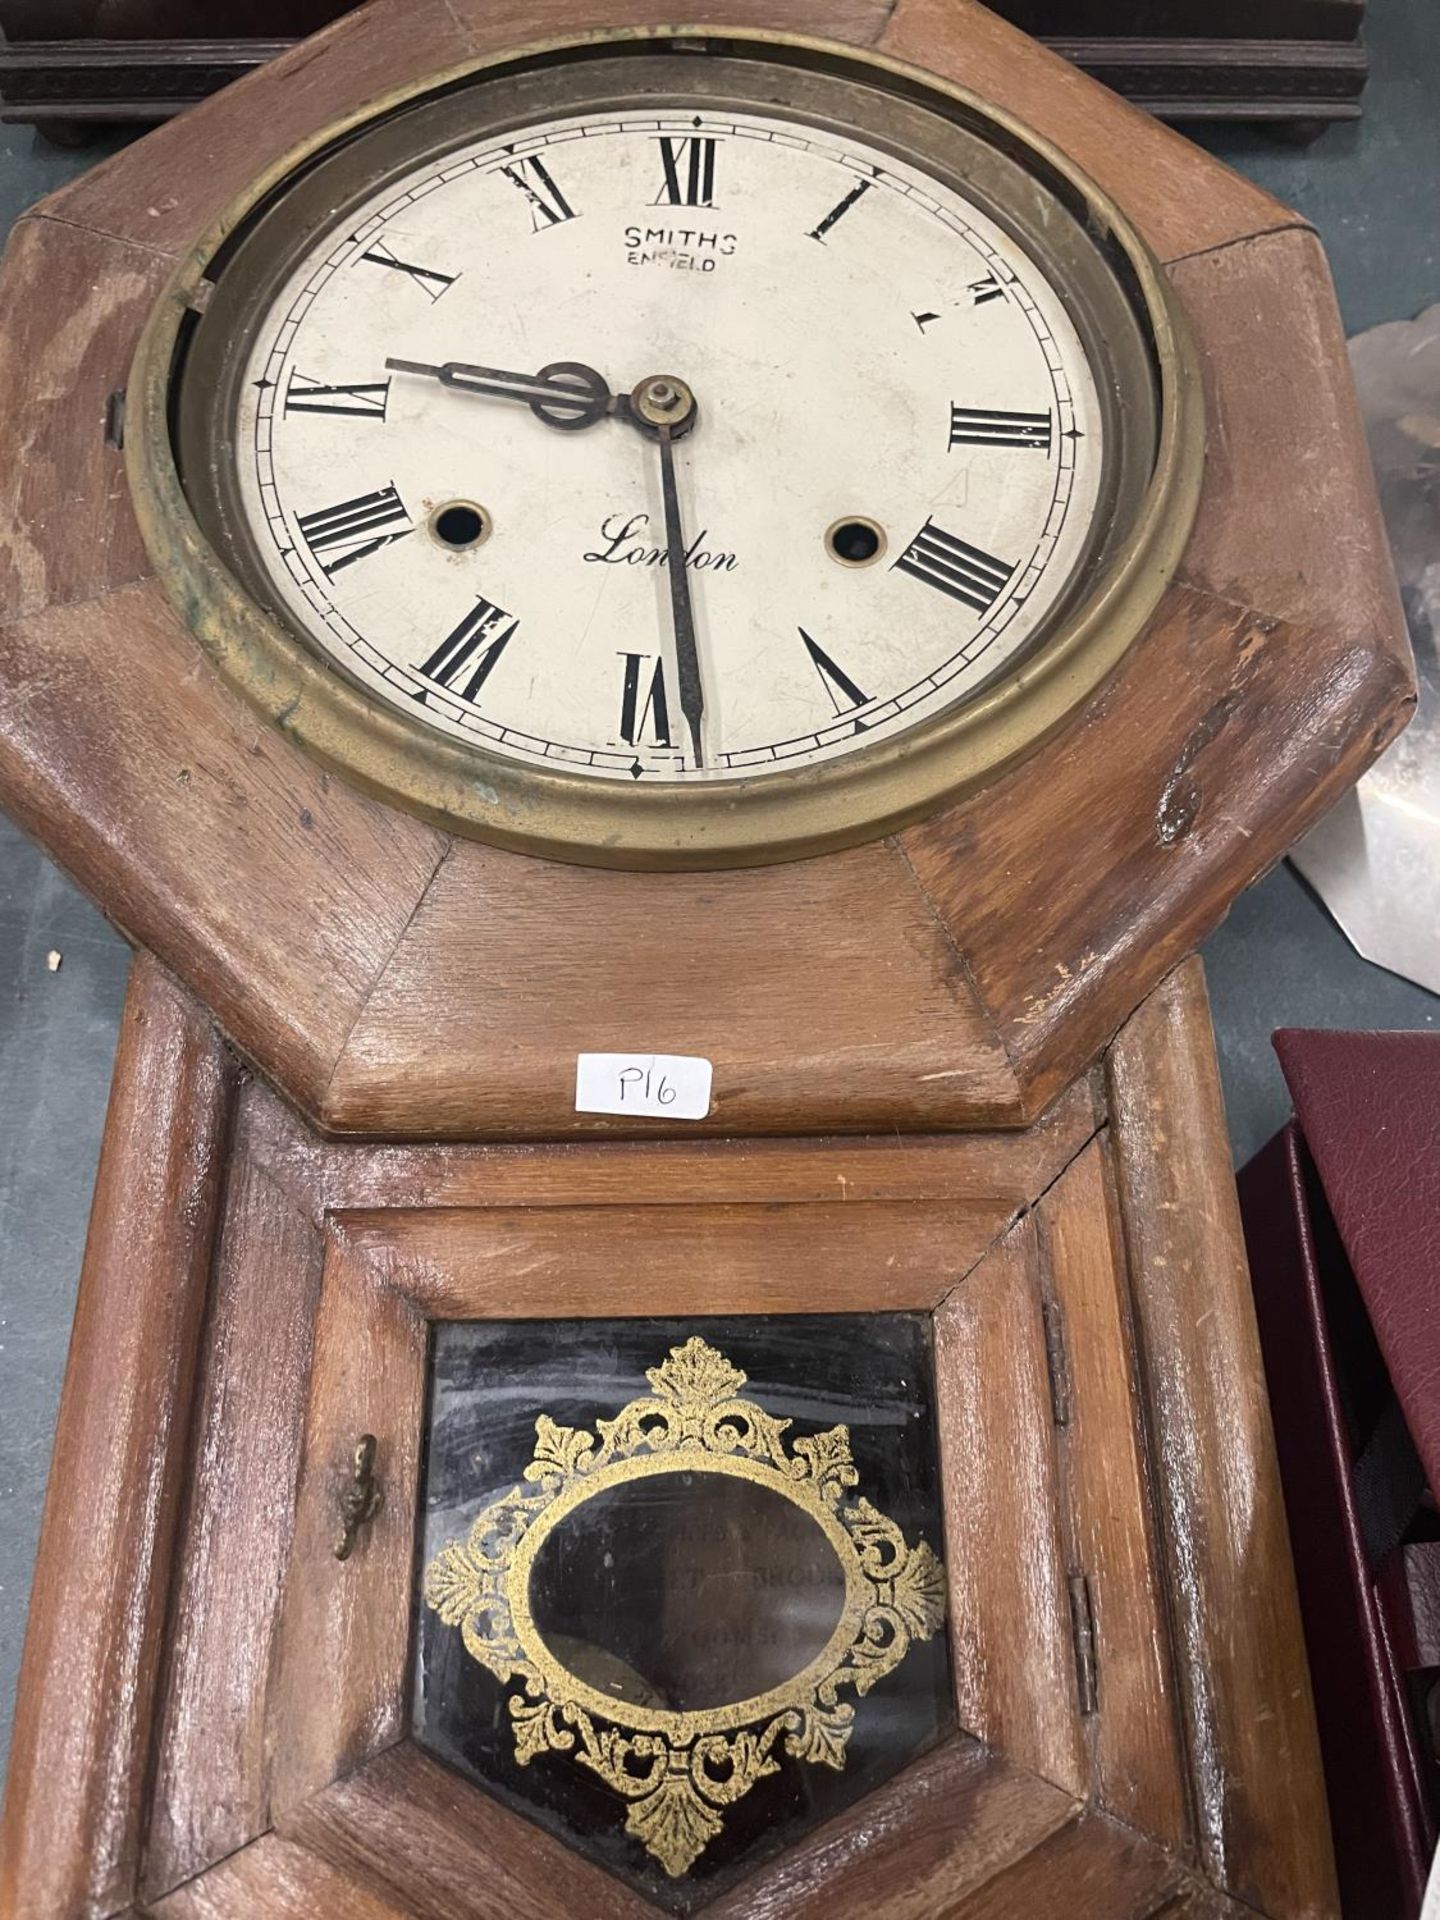 A VINTAGE SMITH'S ENFIELD MAHOGANY CASED WALL CLOCK IN NEED OF RESTORATION PLUS A NAPOLEON'S HAT - Image 2 of 4